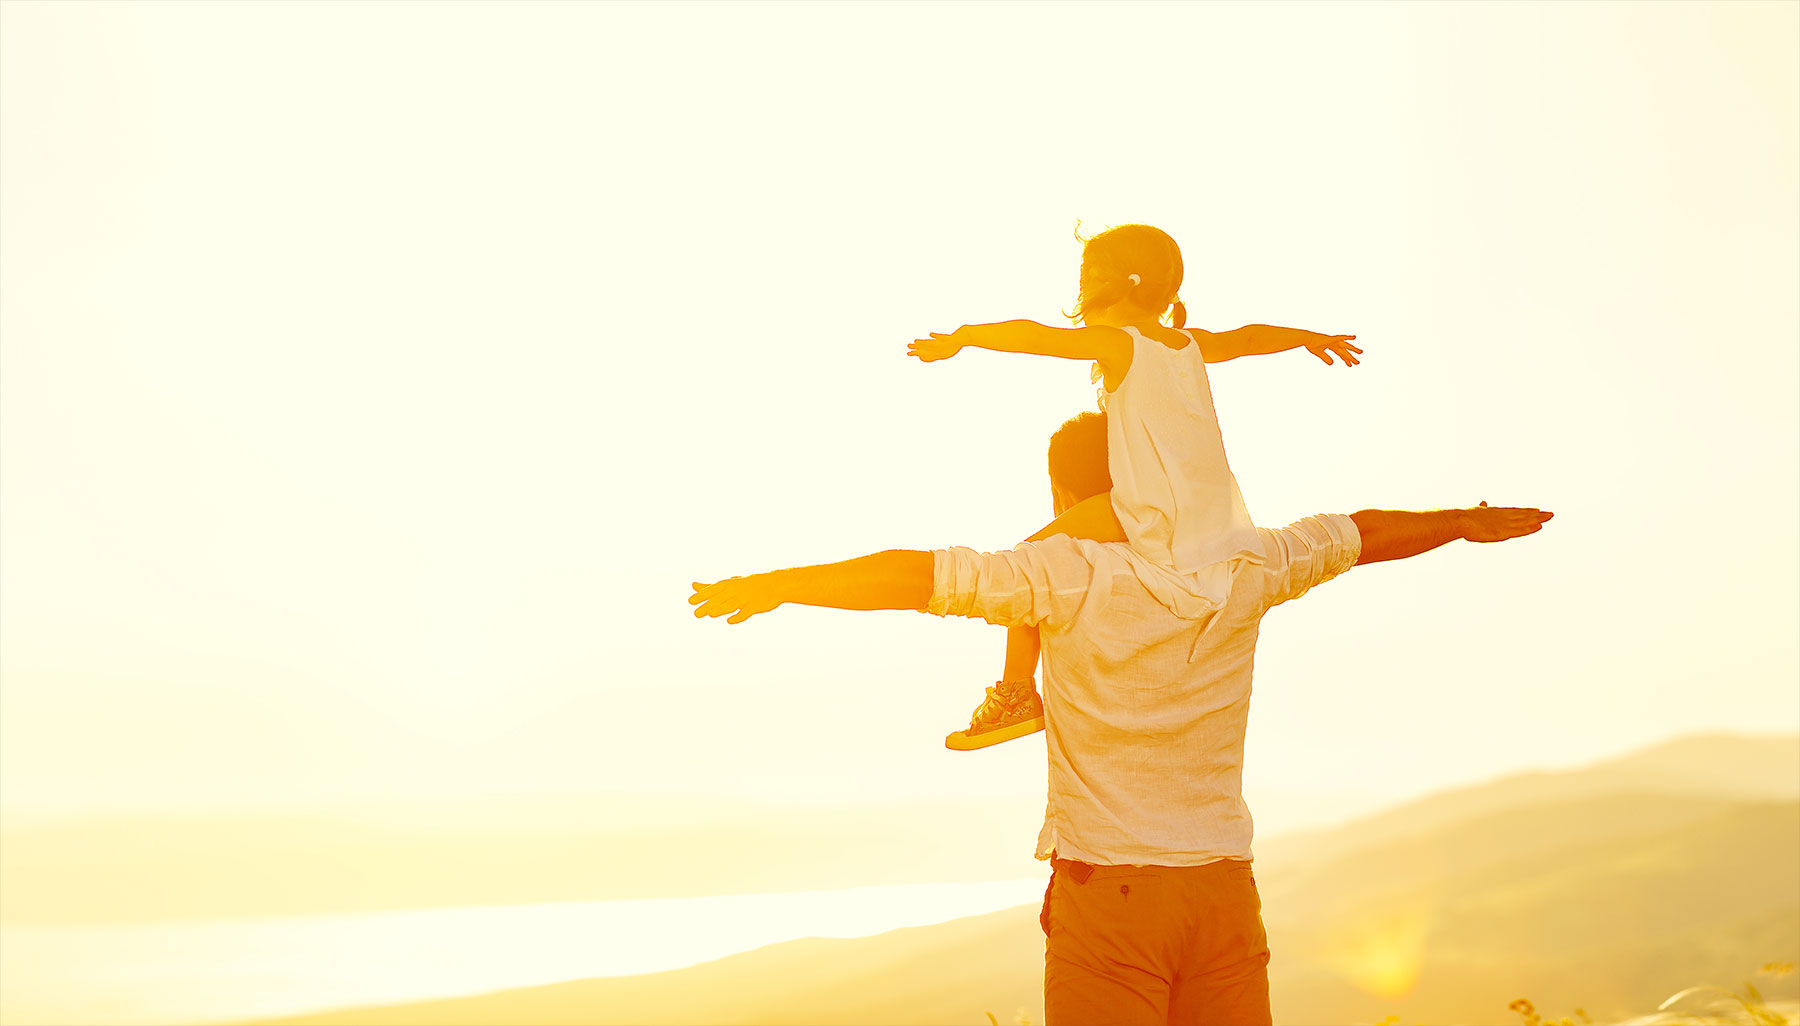 father holding daughter on shoulders, daughter with arms spread in flying motion